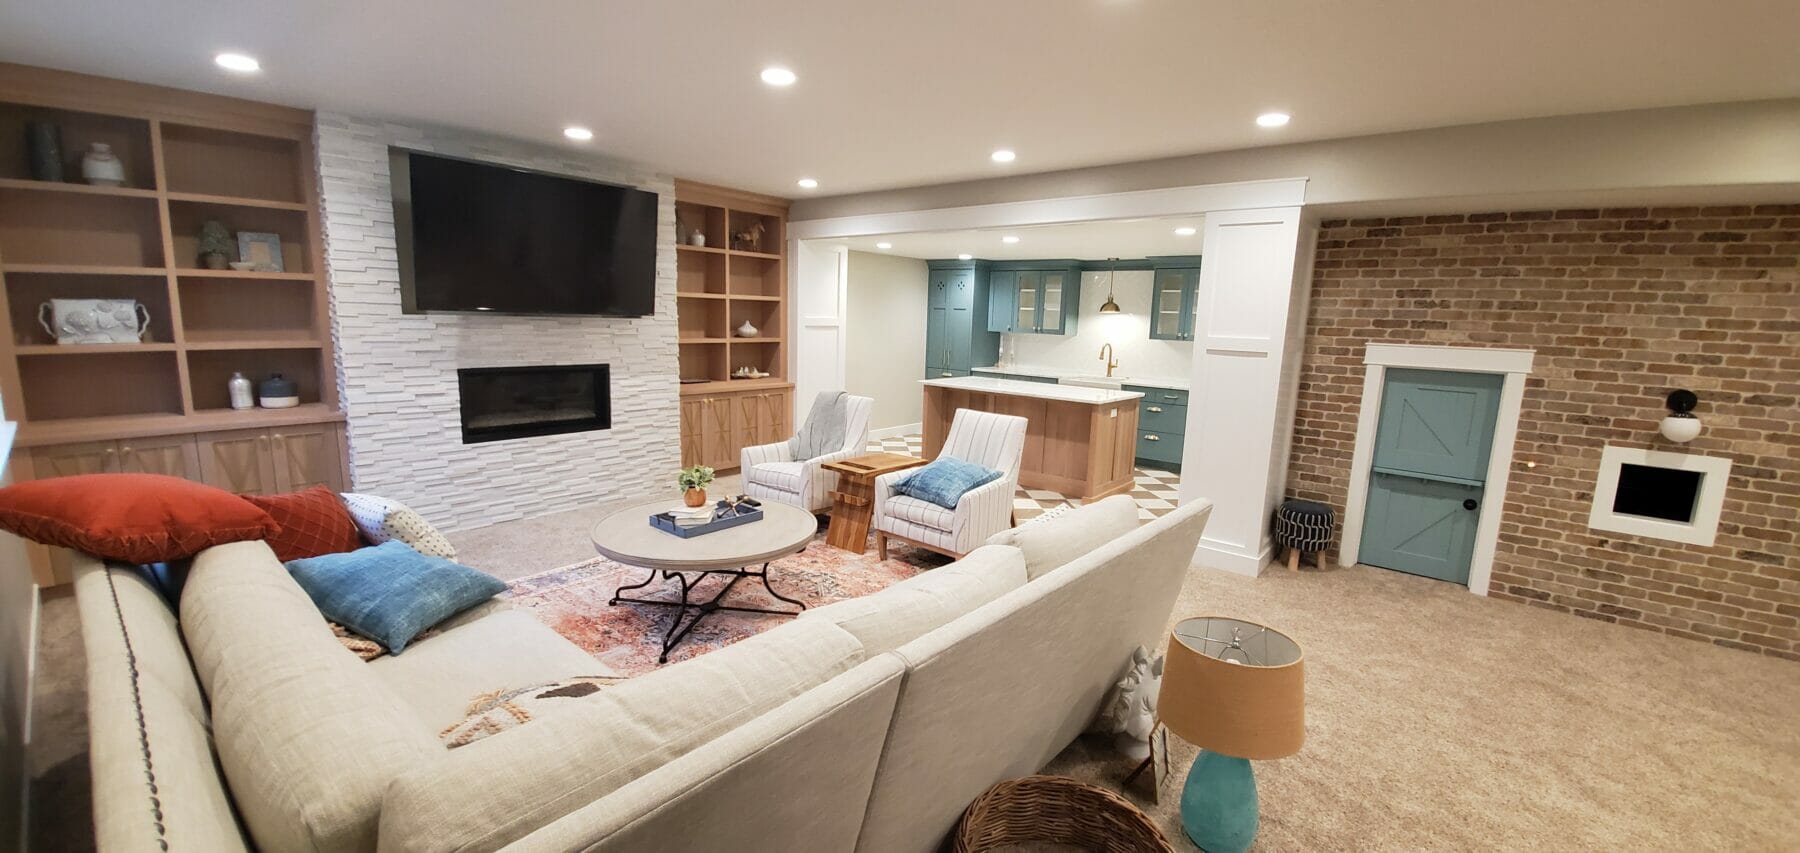 8 Ways to Transform Your Basement into a Space You’ll Love